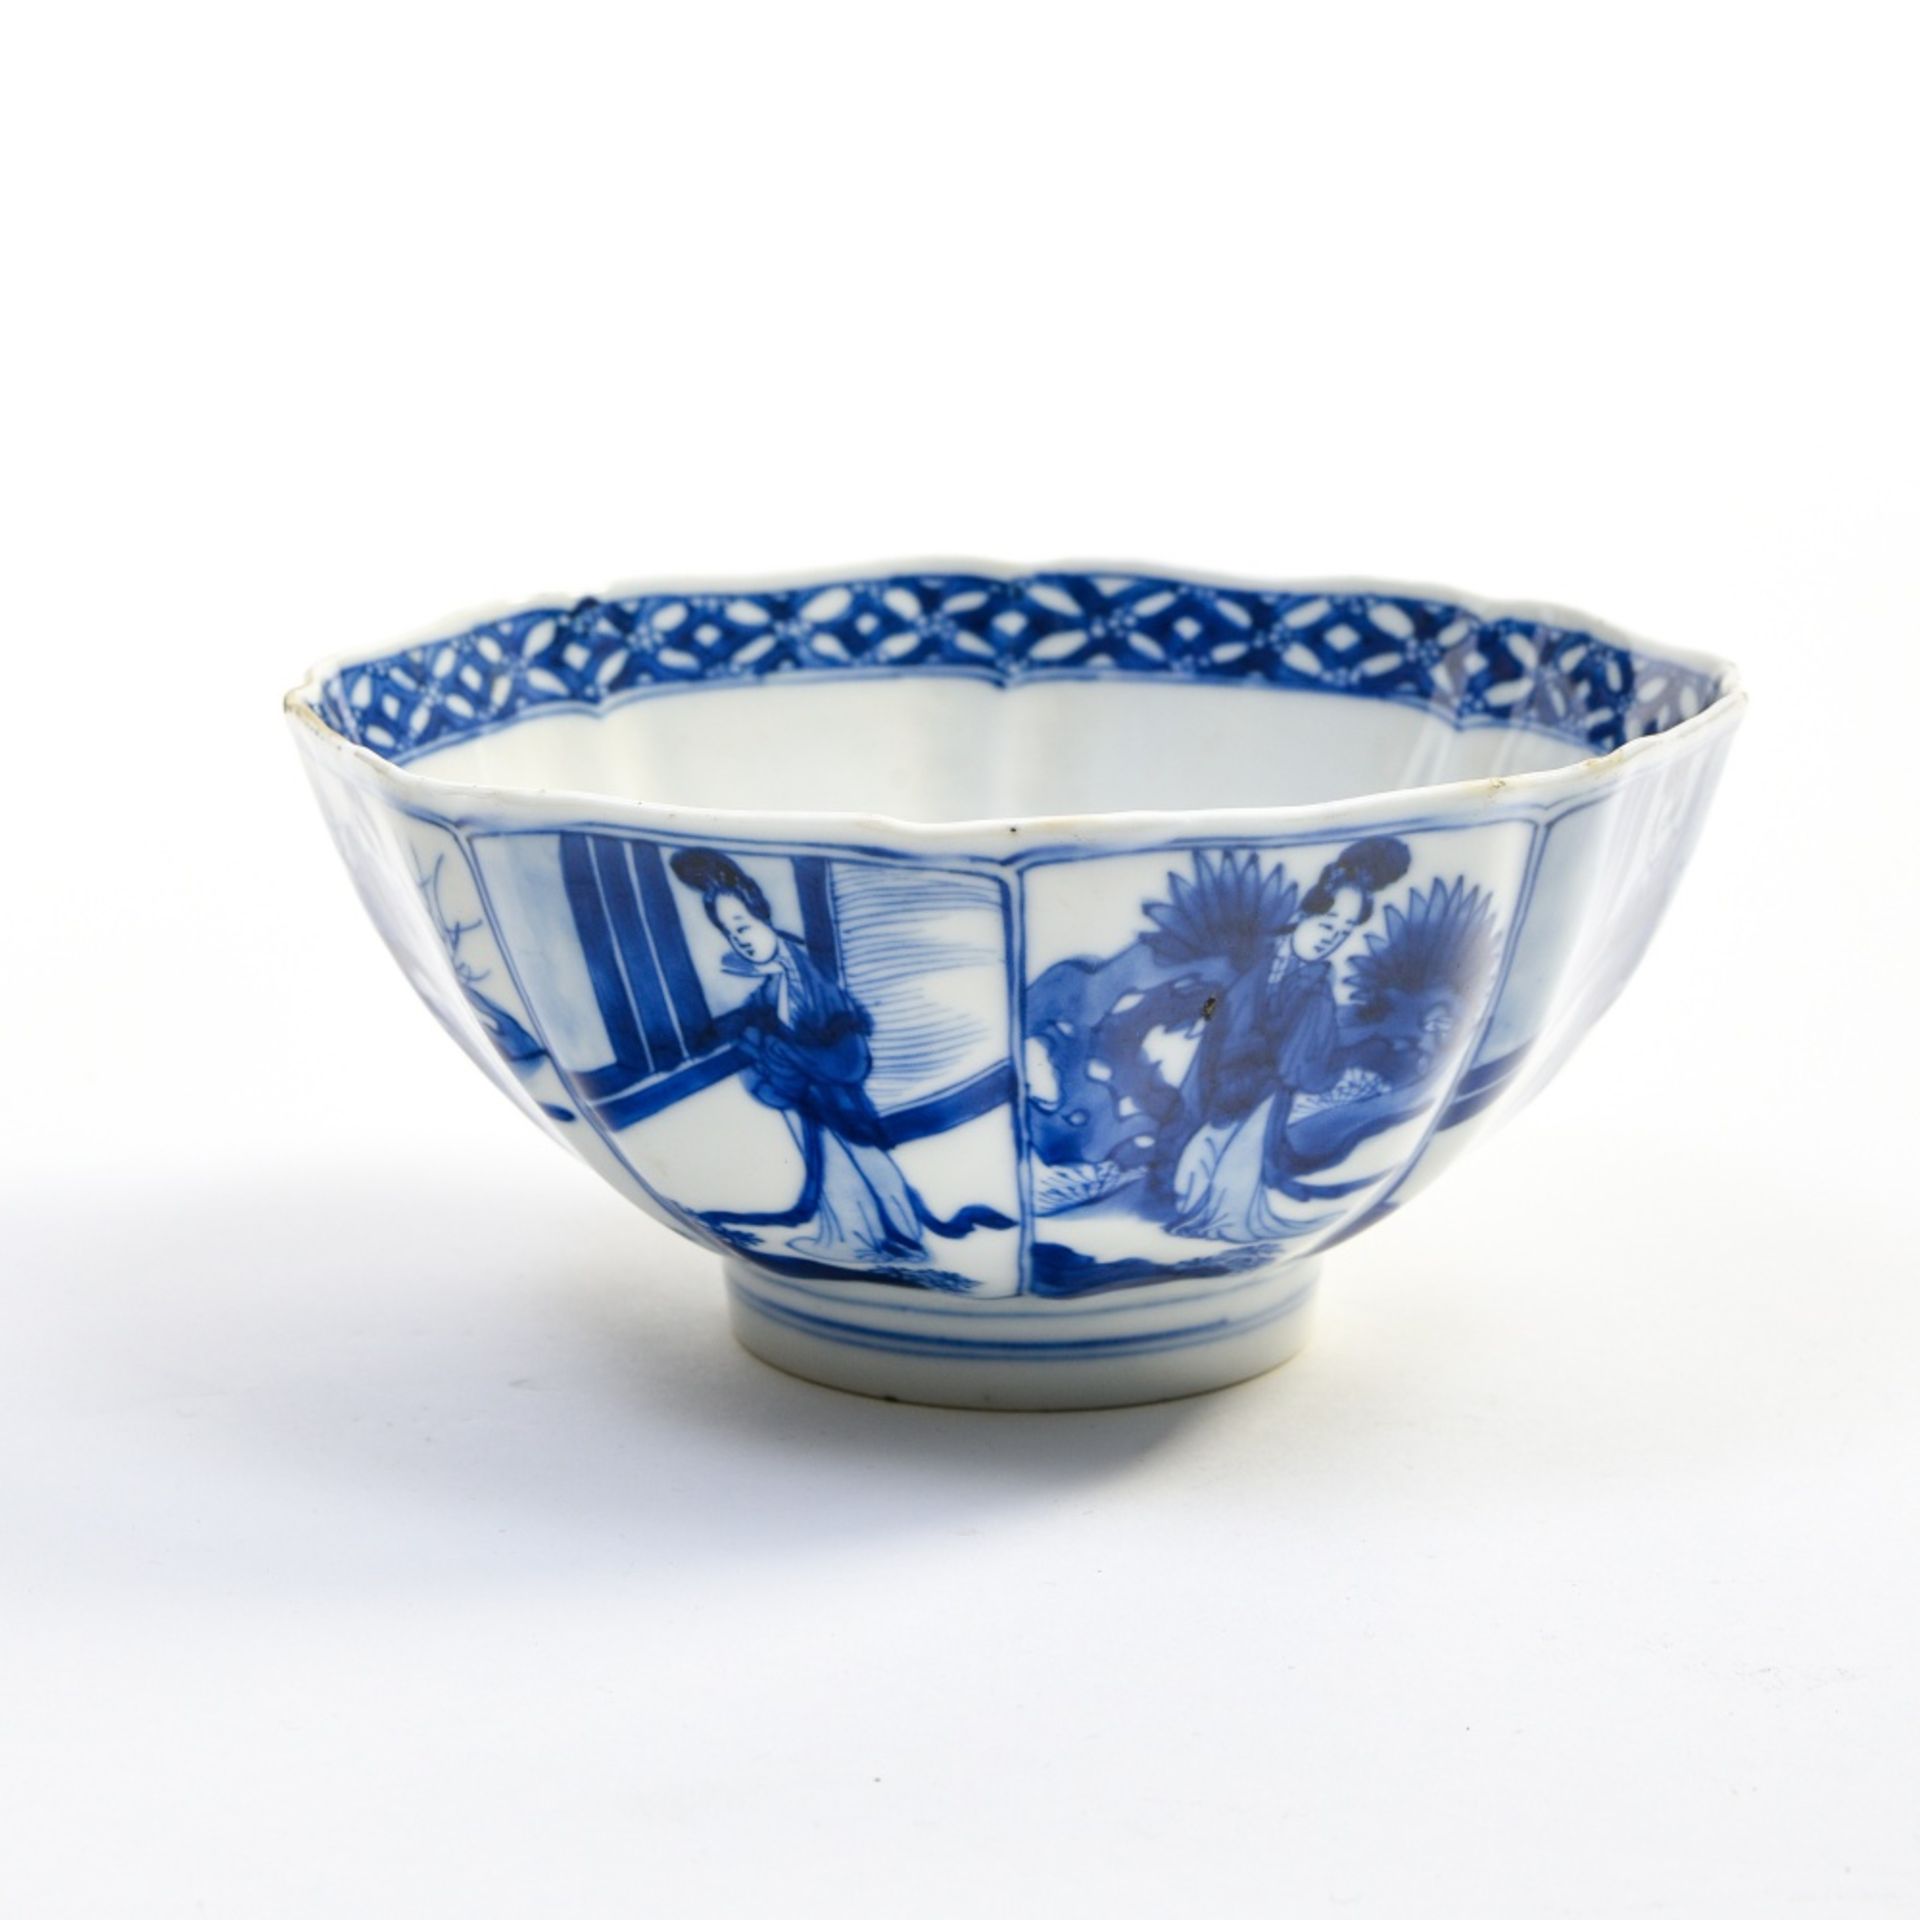 China, 18th century or earlier Multifaceted bowl, Blue and white porcelain decorated with children - Image 2 of 6